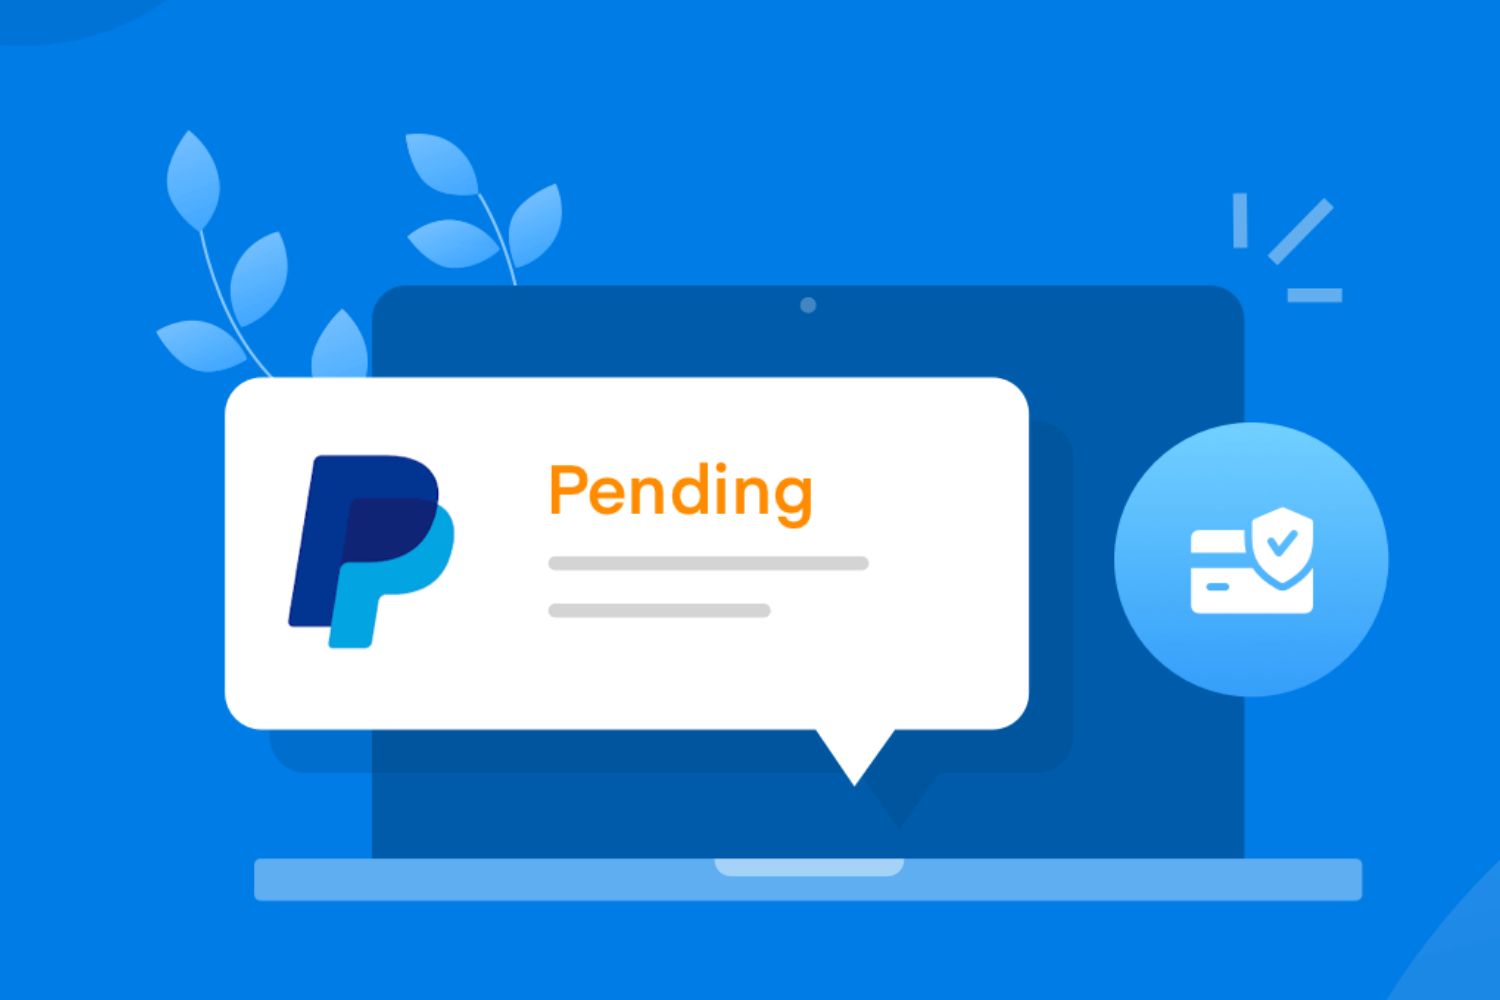 Do you know about PayPal transaction pending?